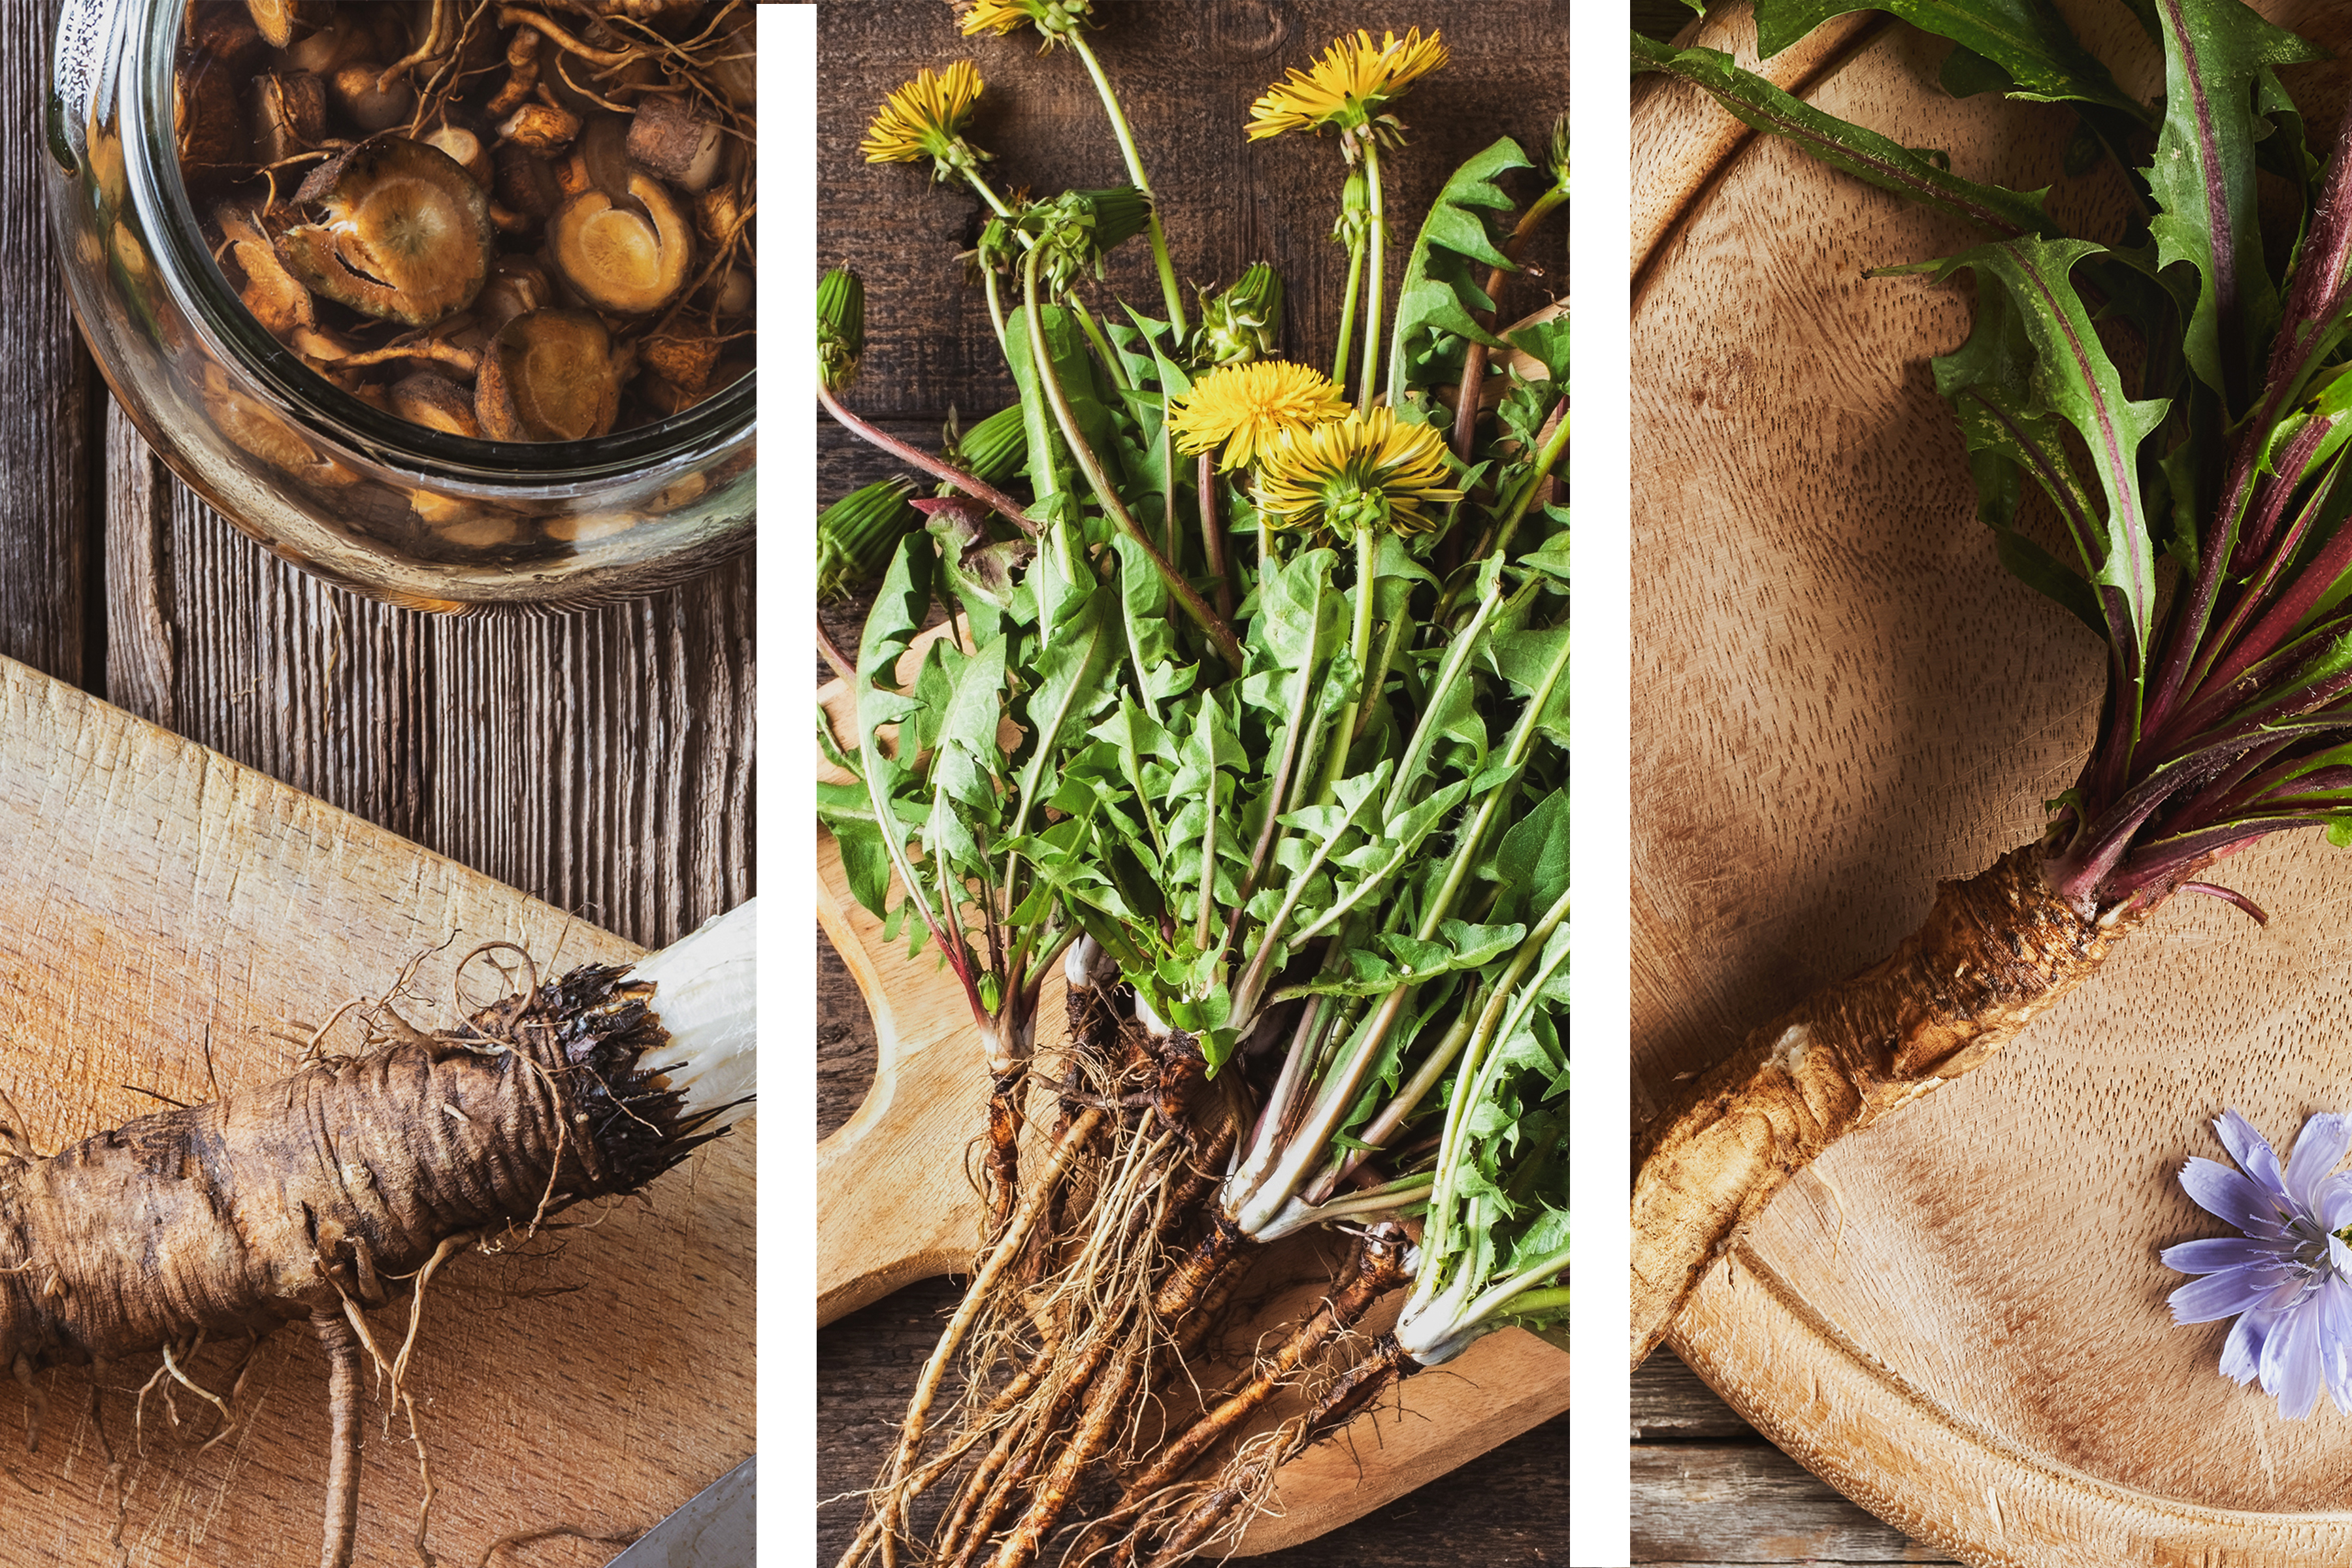 Mountain Rose Herbs - Summer Stories and Recipes 2019 by Mountain